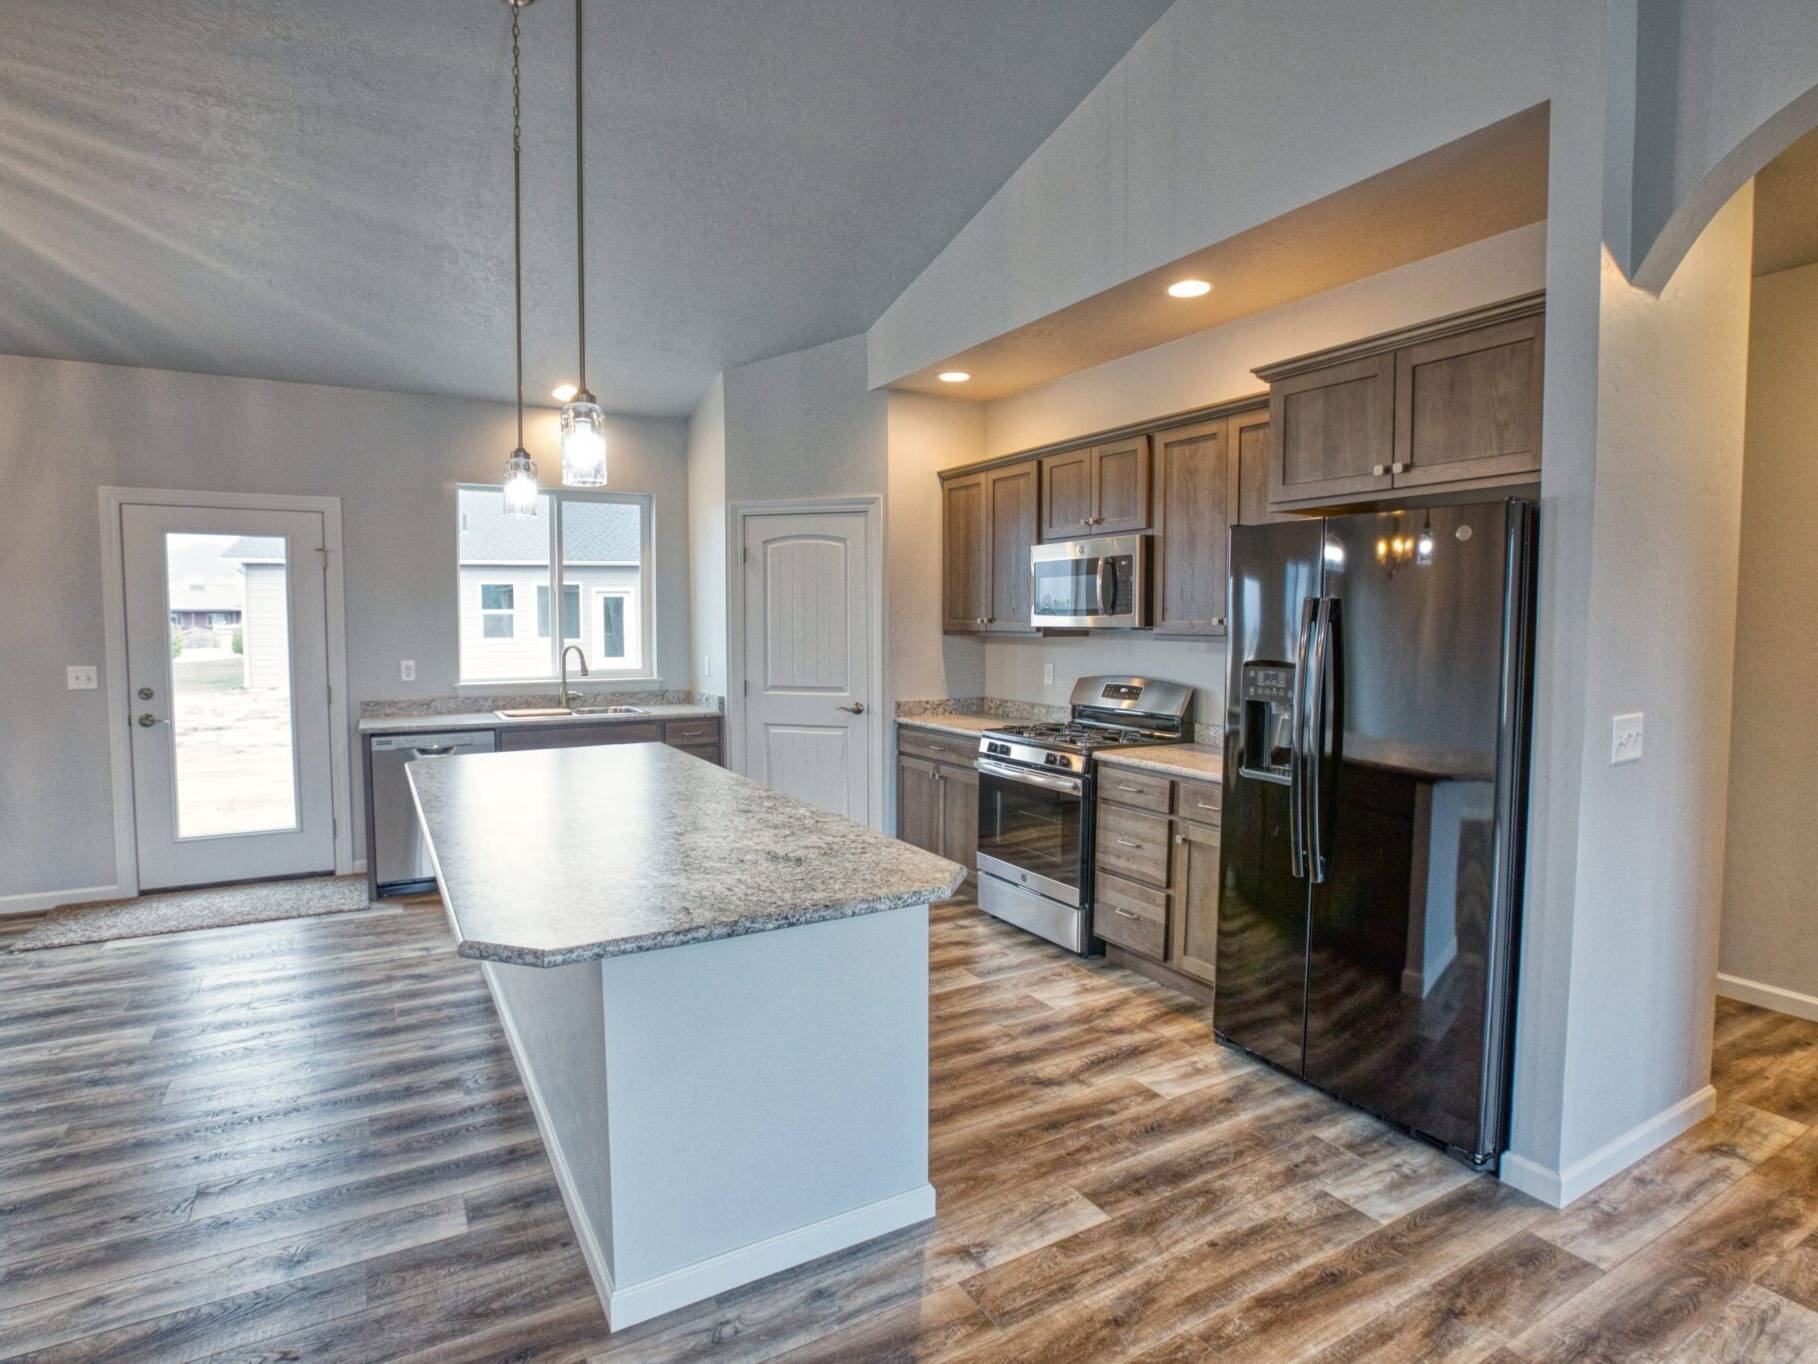 Kitchen in the Canyon Ferry model home - built by Big Sky Builders in Hamilton, MT